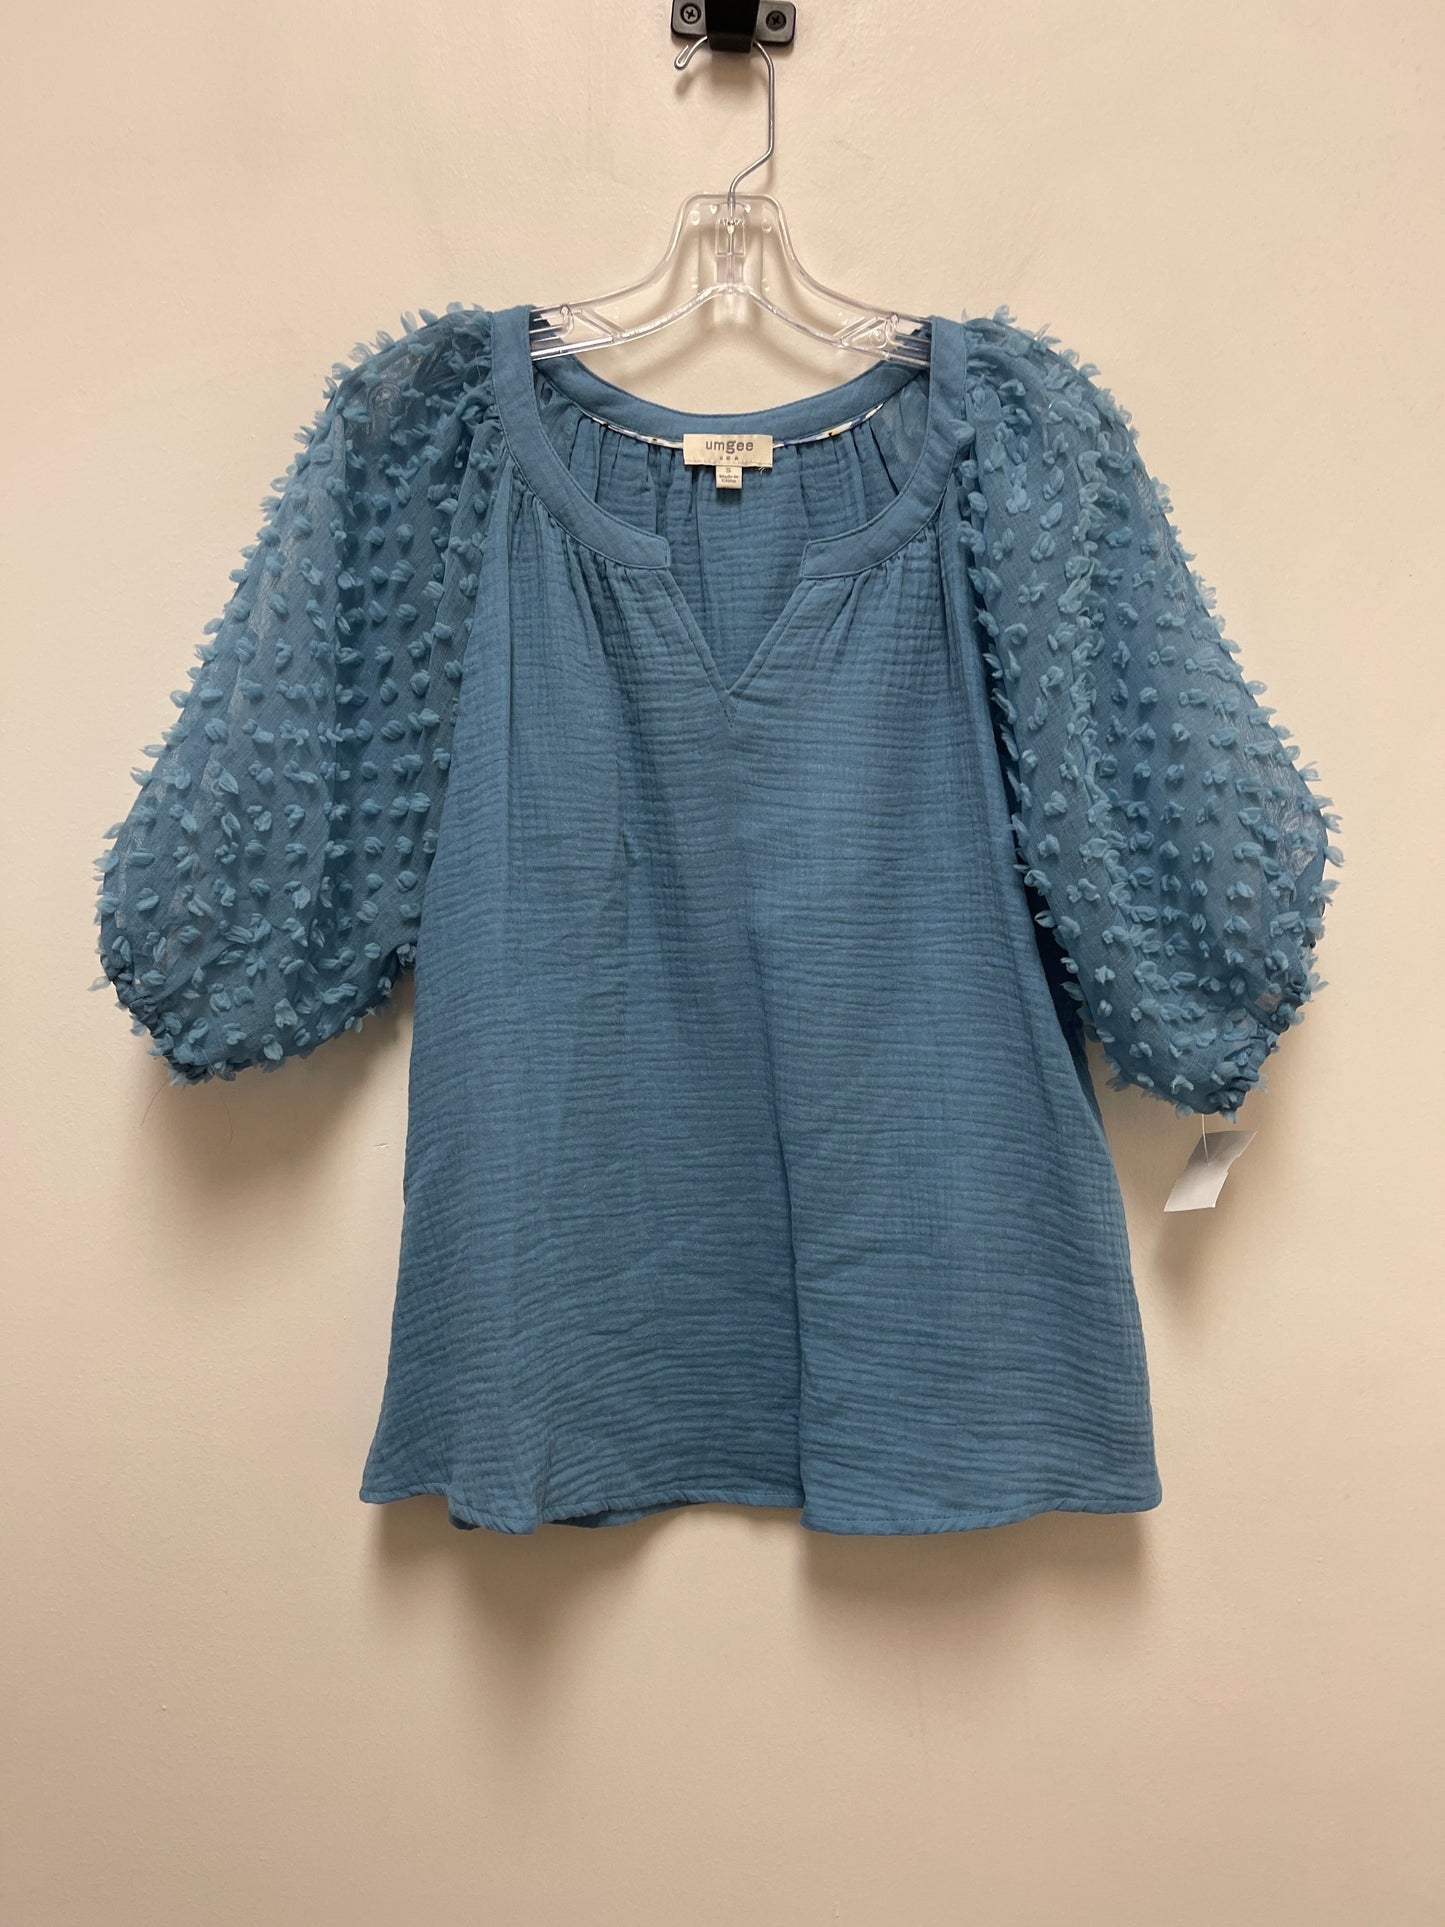 Blue Top Short Sleeve Umgee, Size S